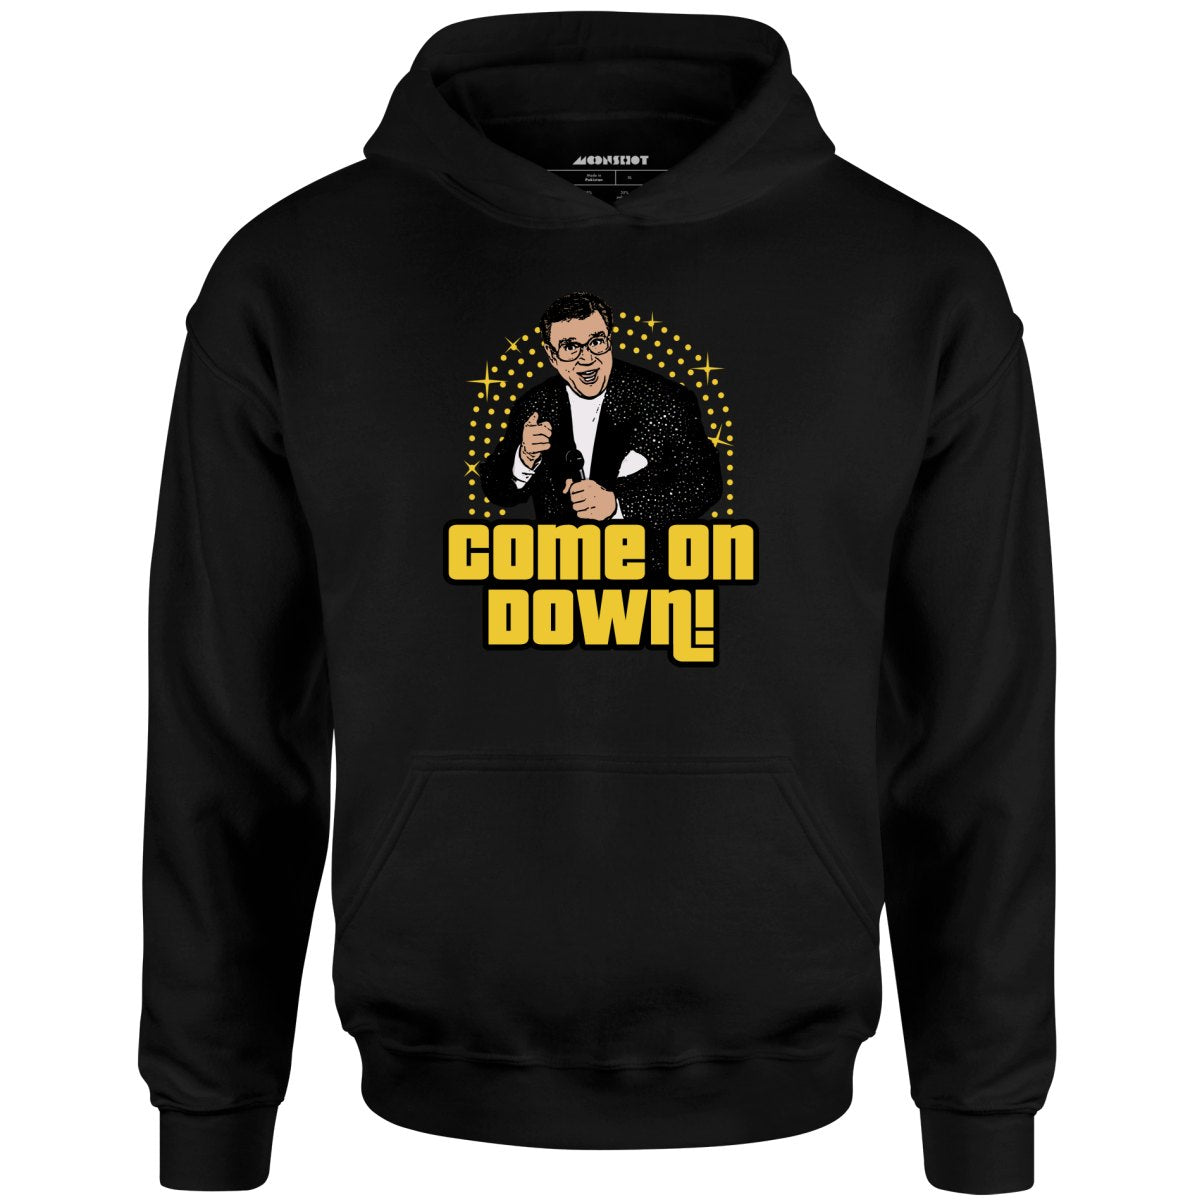 Come On Down - Unisex Hoodie